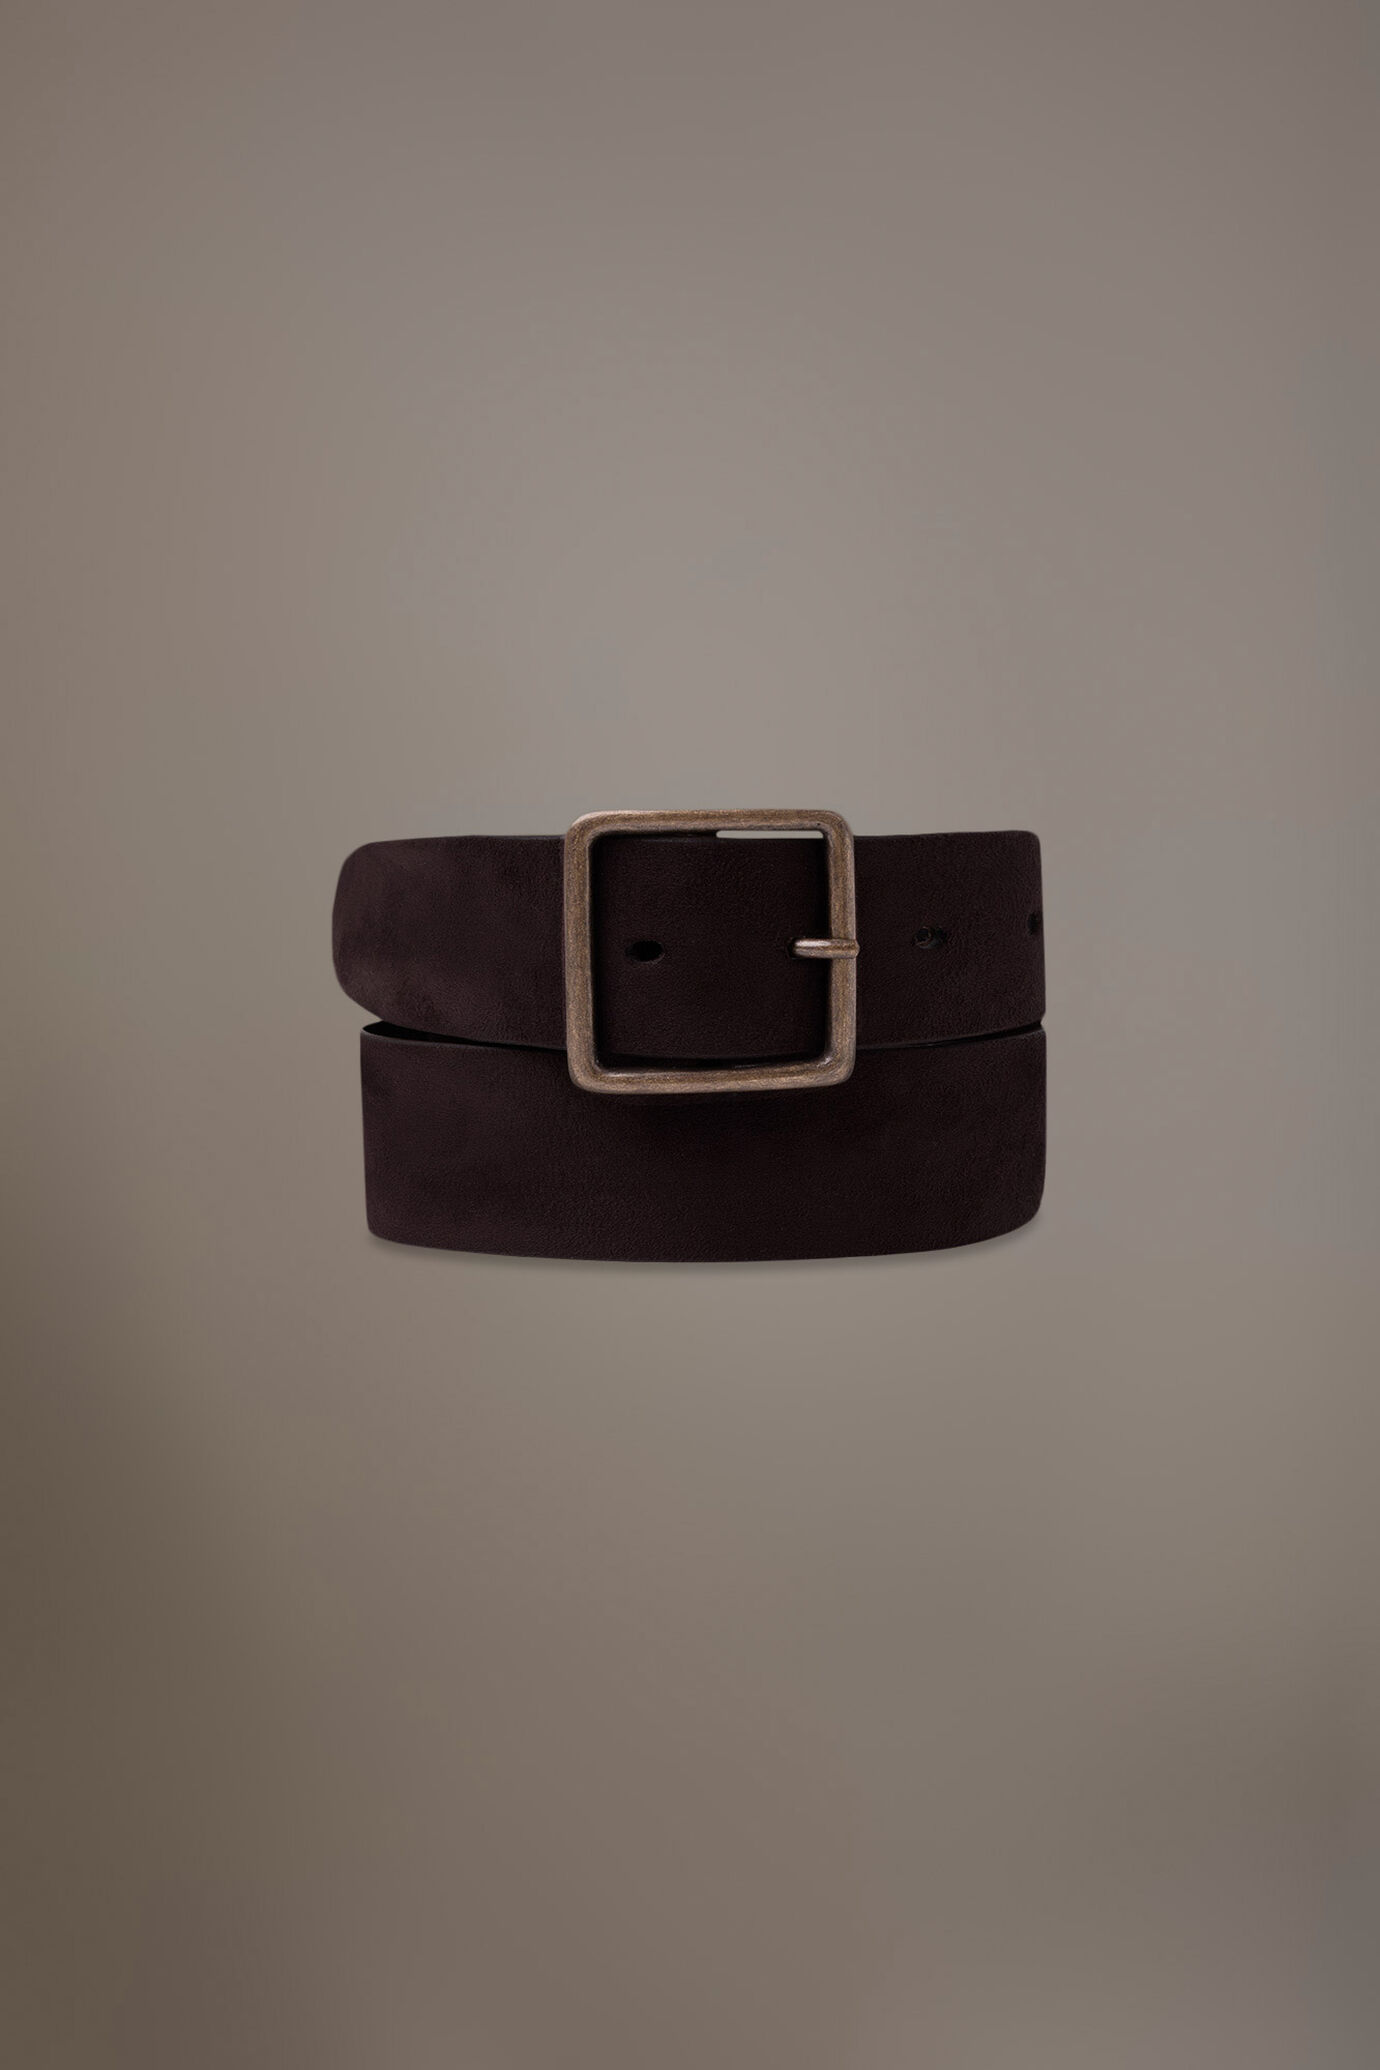 Classic belt 100% leather made in Italy